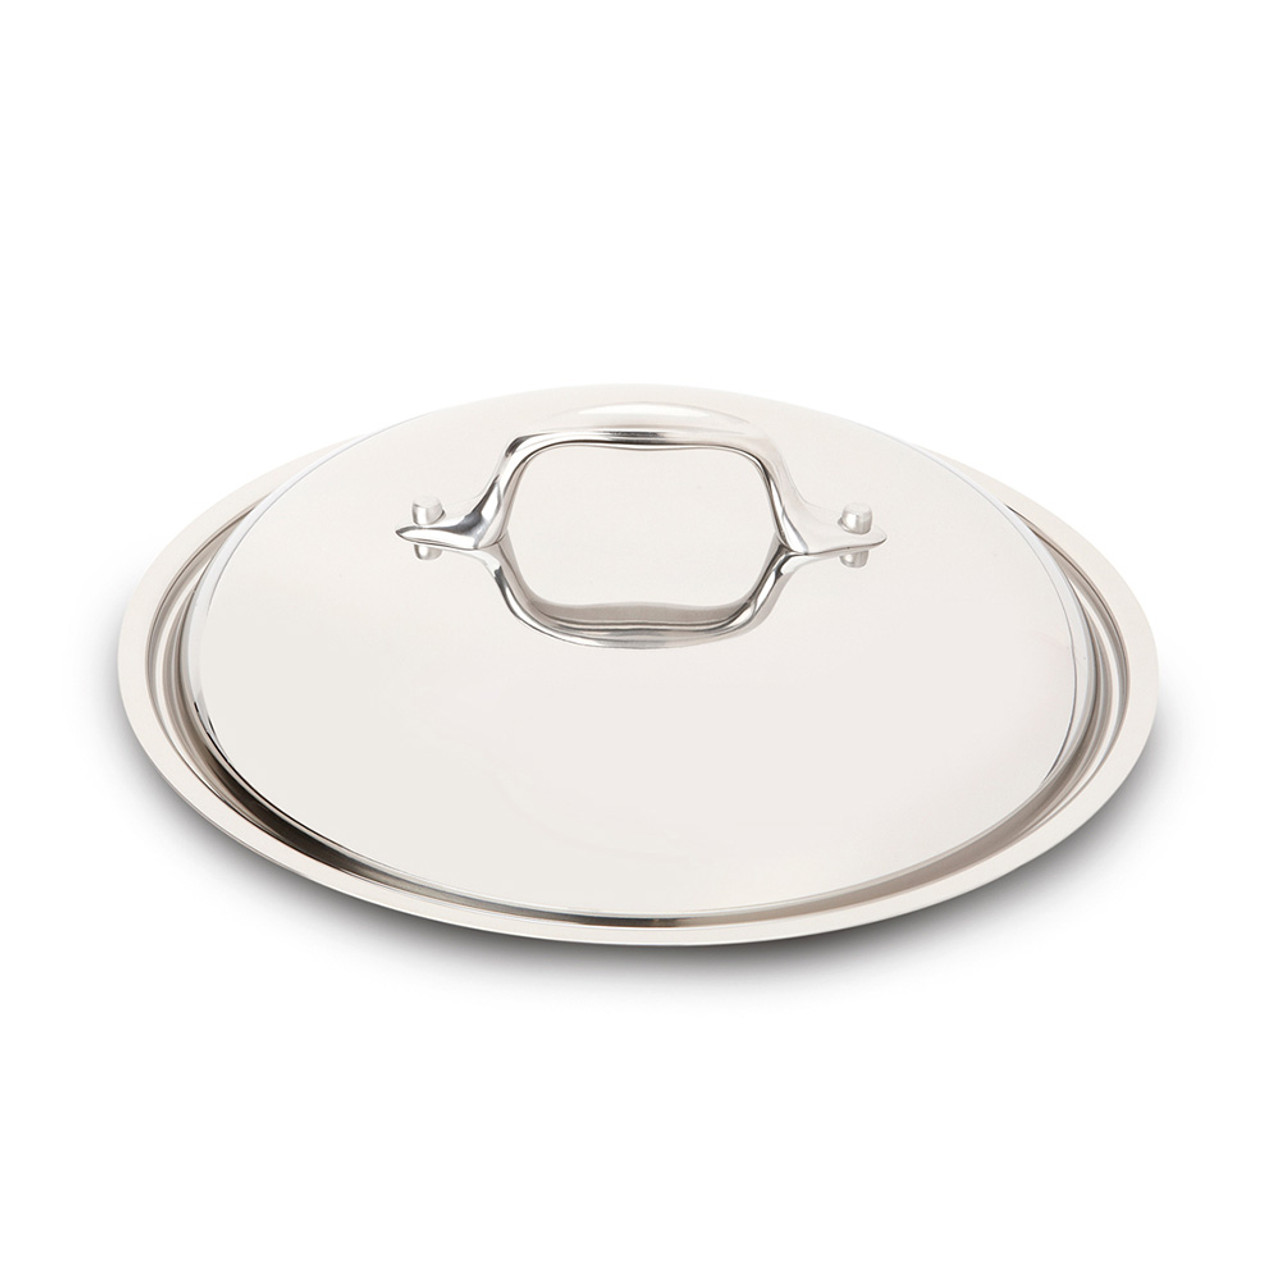 D3 Stainless Braiser with Domed Lid